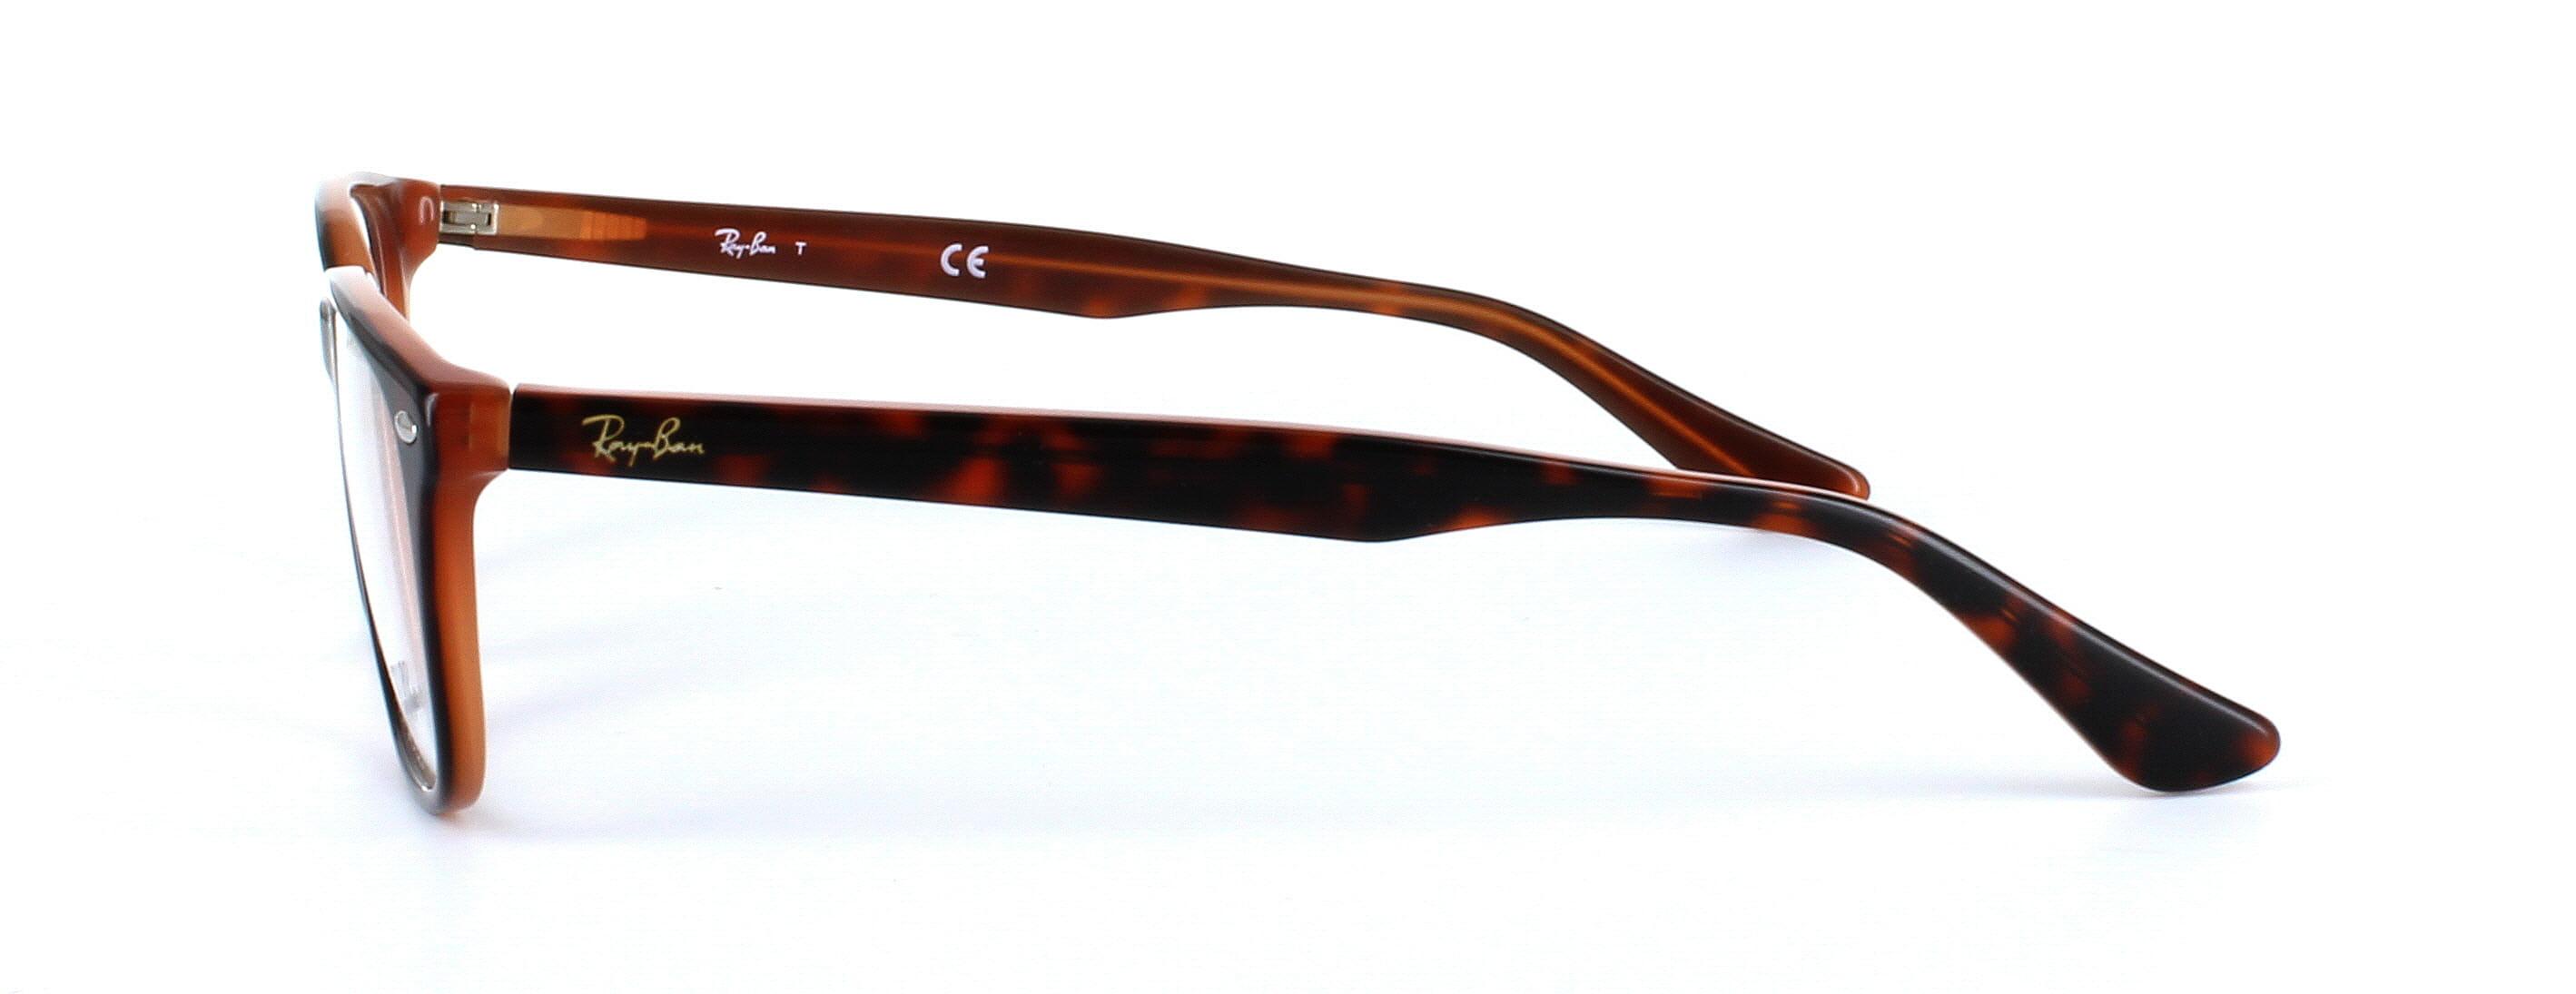 Ray Ban 5275 - Unisex acetate glasses - brown - image view 2